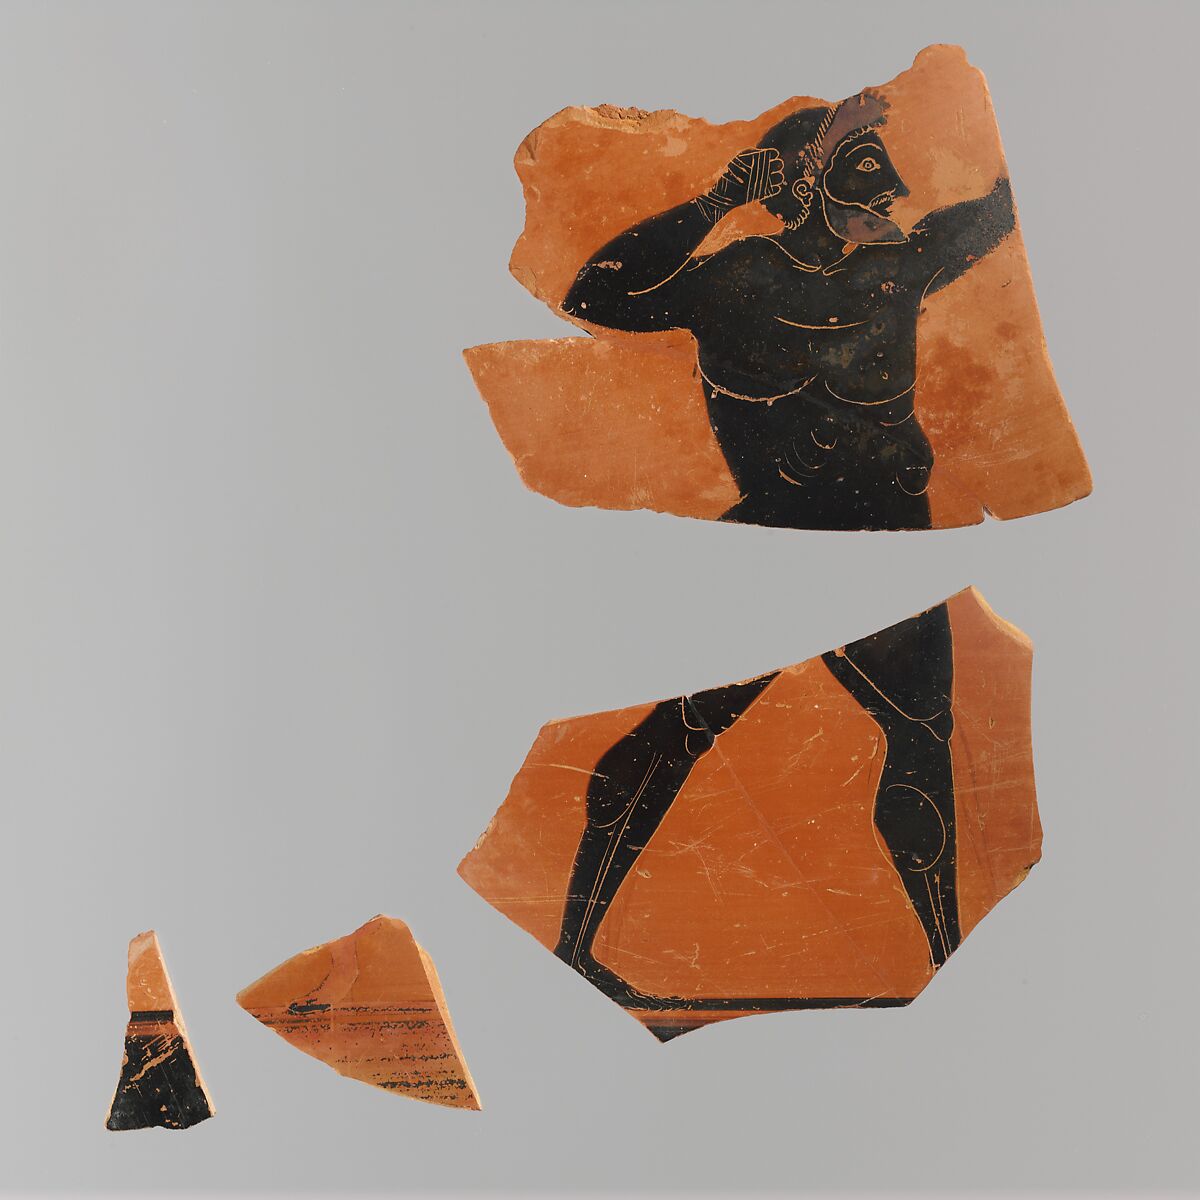 Fragments of a terracotta amphora (jar), Probably by the Painter of Tarquinia RC 6847, Terracotta, Greek, Attic 